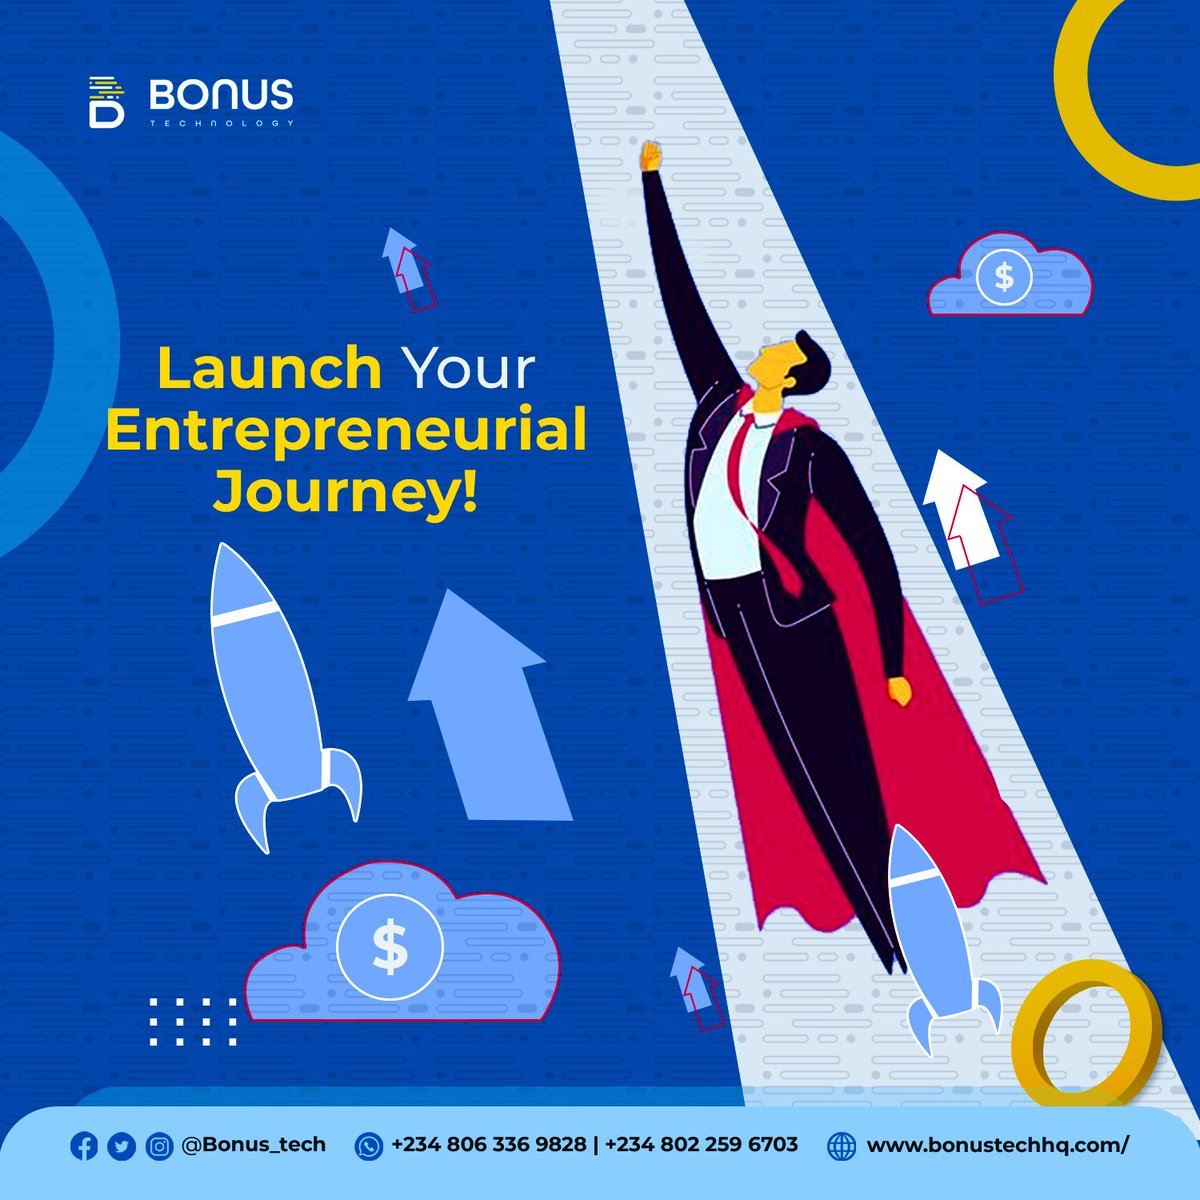 Ready to turn your business dreams into reality? Secure your place in the business world with our hassle-free business registration services. Let's navigate the paperwork, so you can focus on building your empire! 
 #BusinessLaunch #EntrepreneurialJourney #Bonustechnology